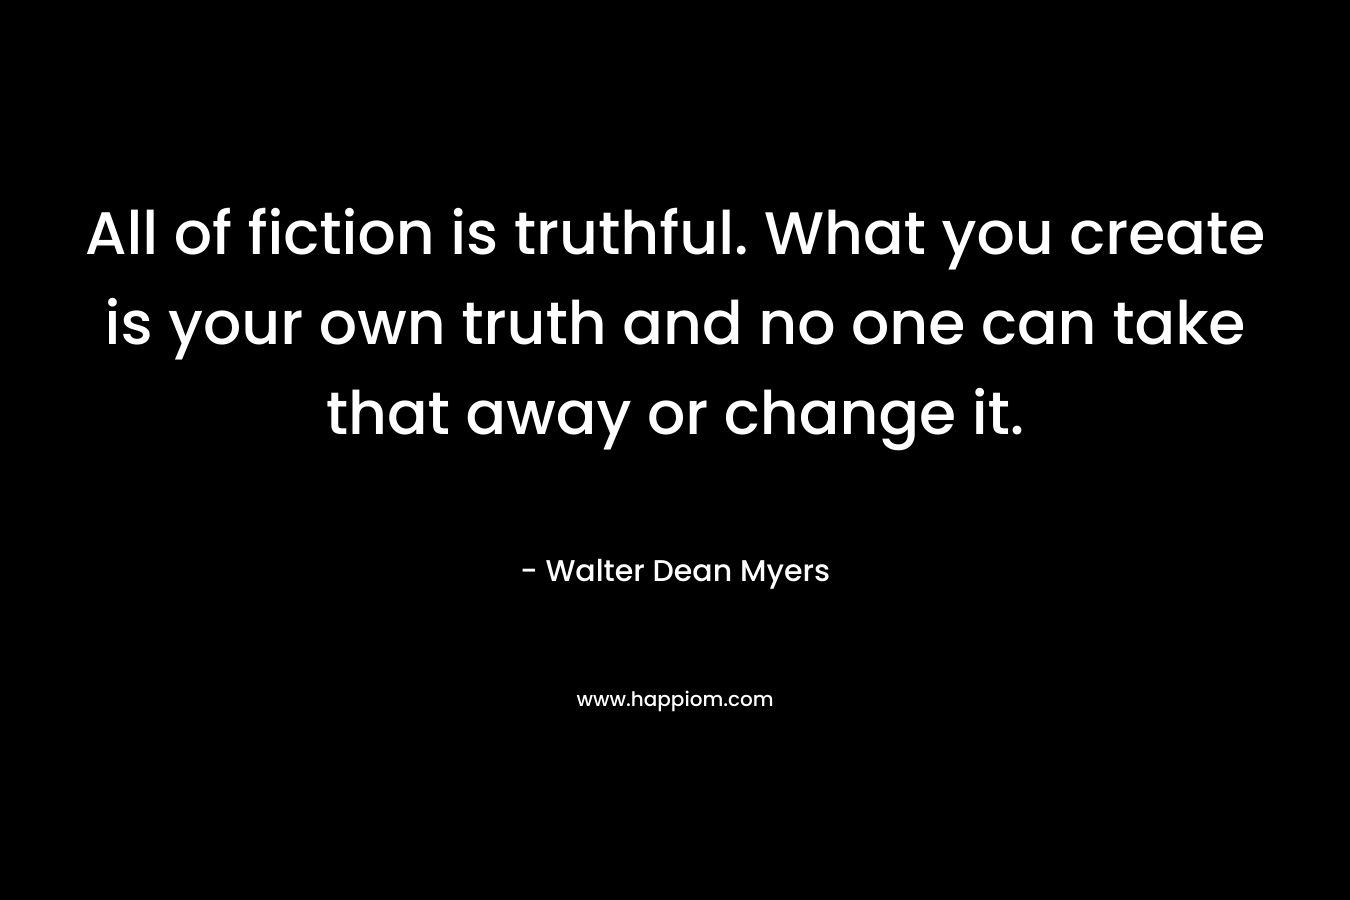 All of fiction is truthful. What you create is your own truth and no one can take that away or change it. – Walter Dean Myers